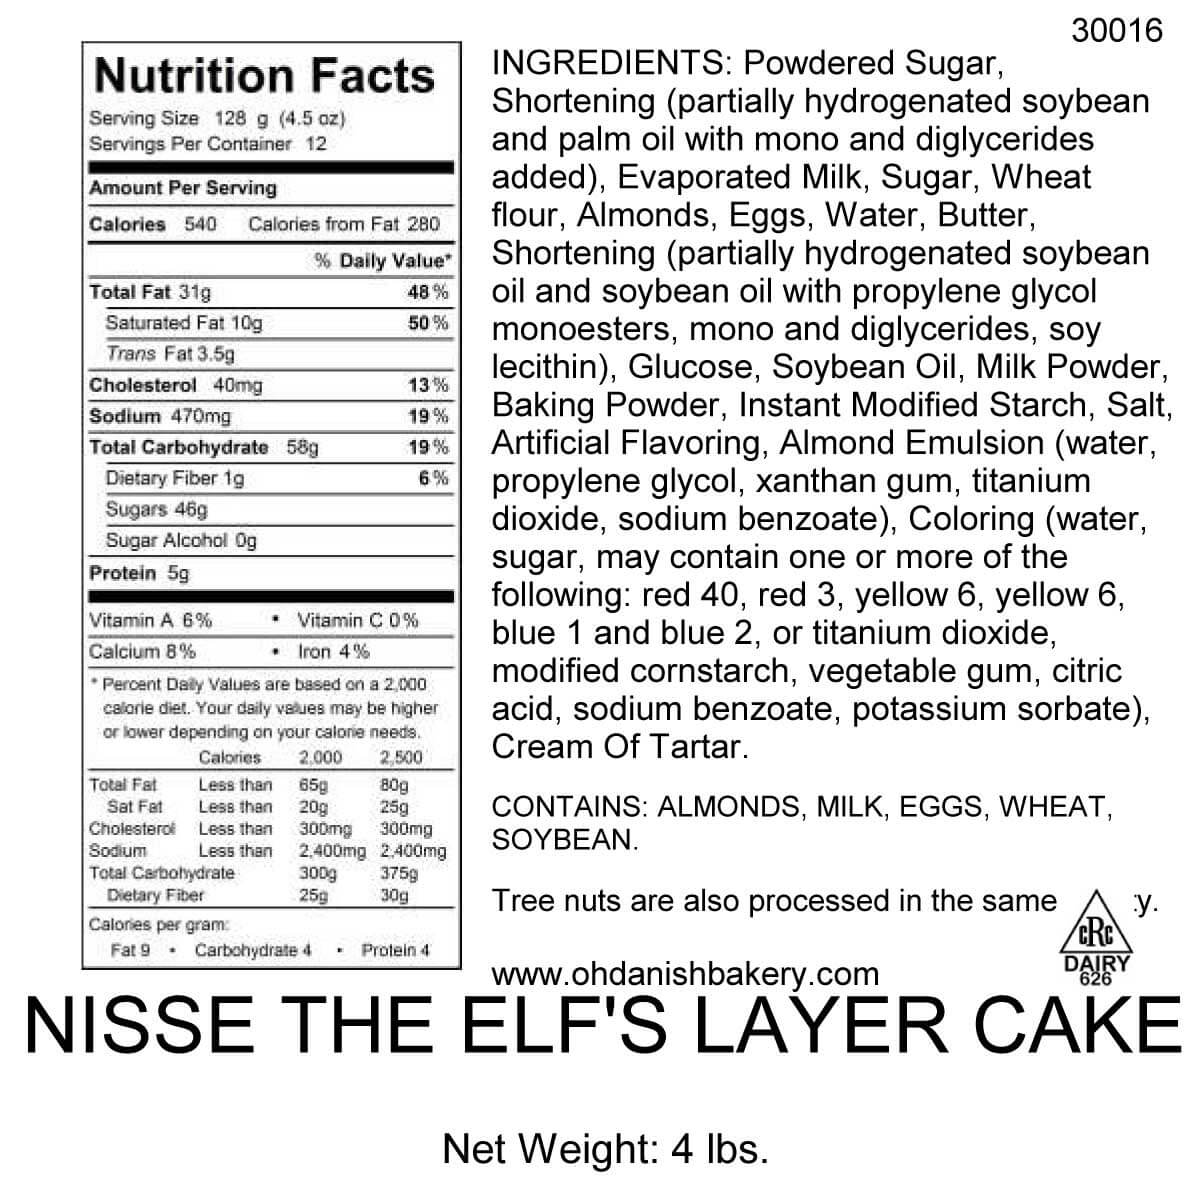 Nutritional Label for Nisse the Elf's Layer Cake